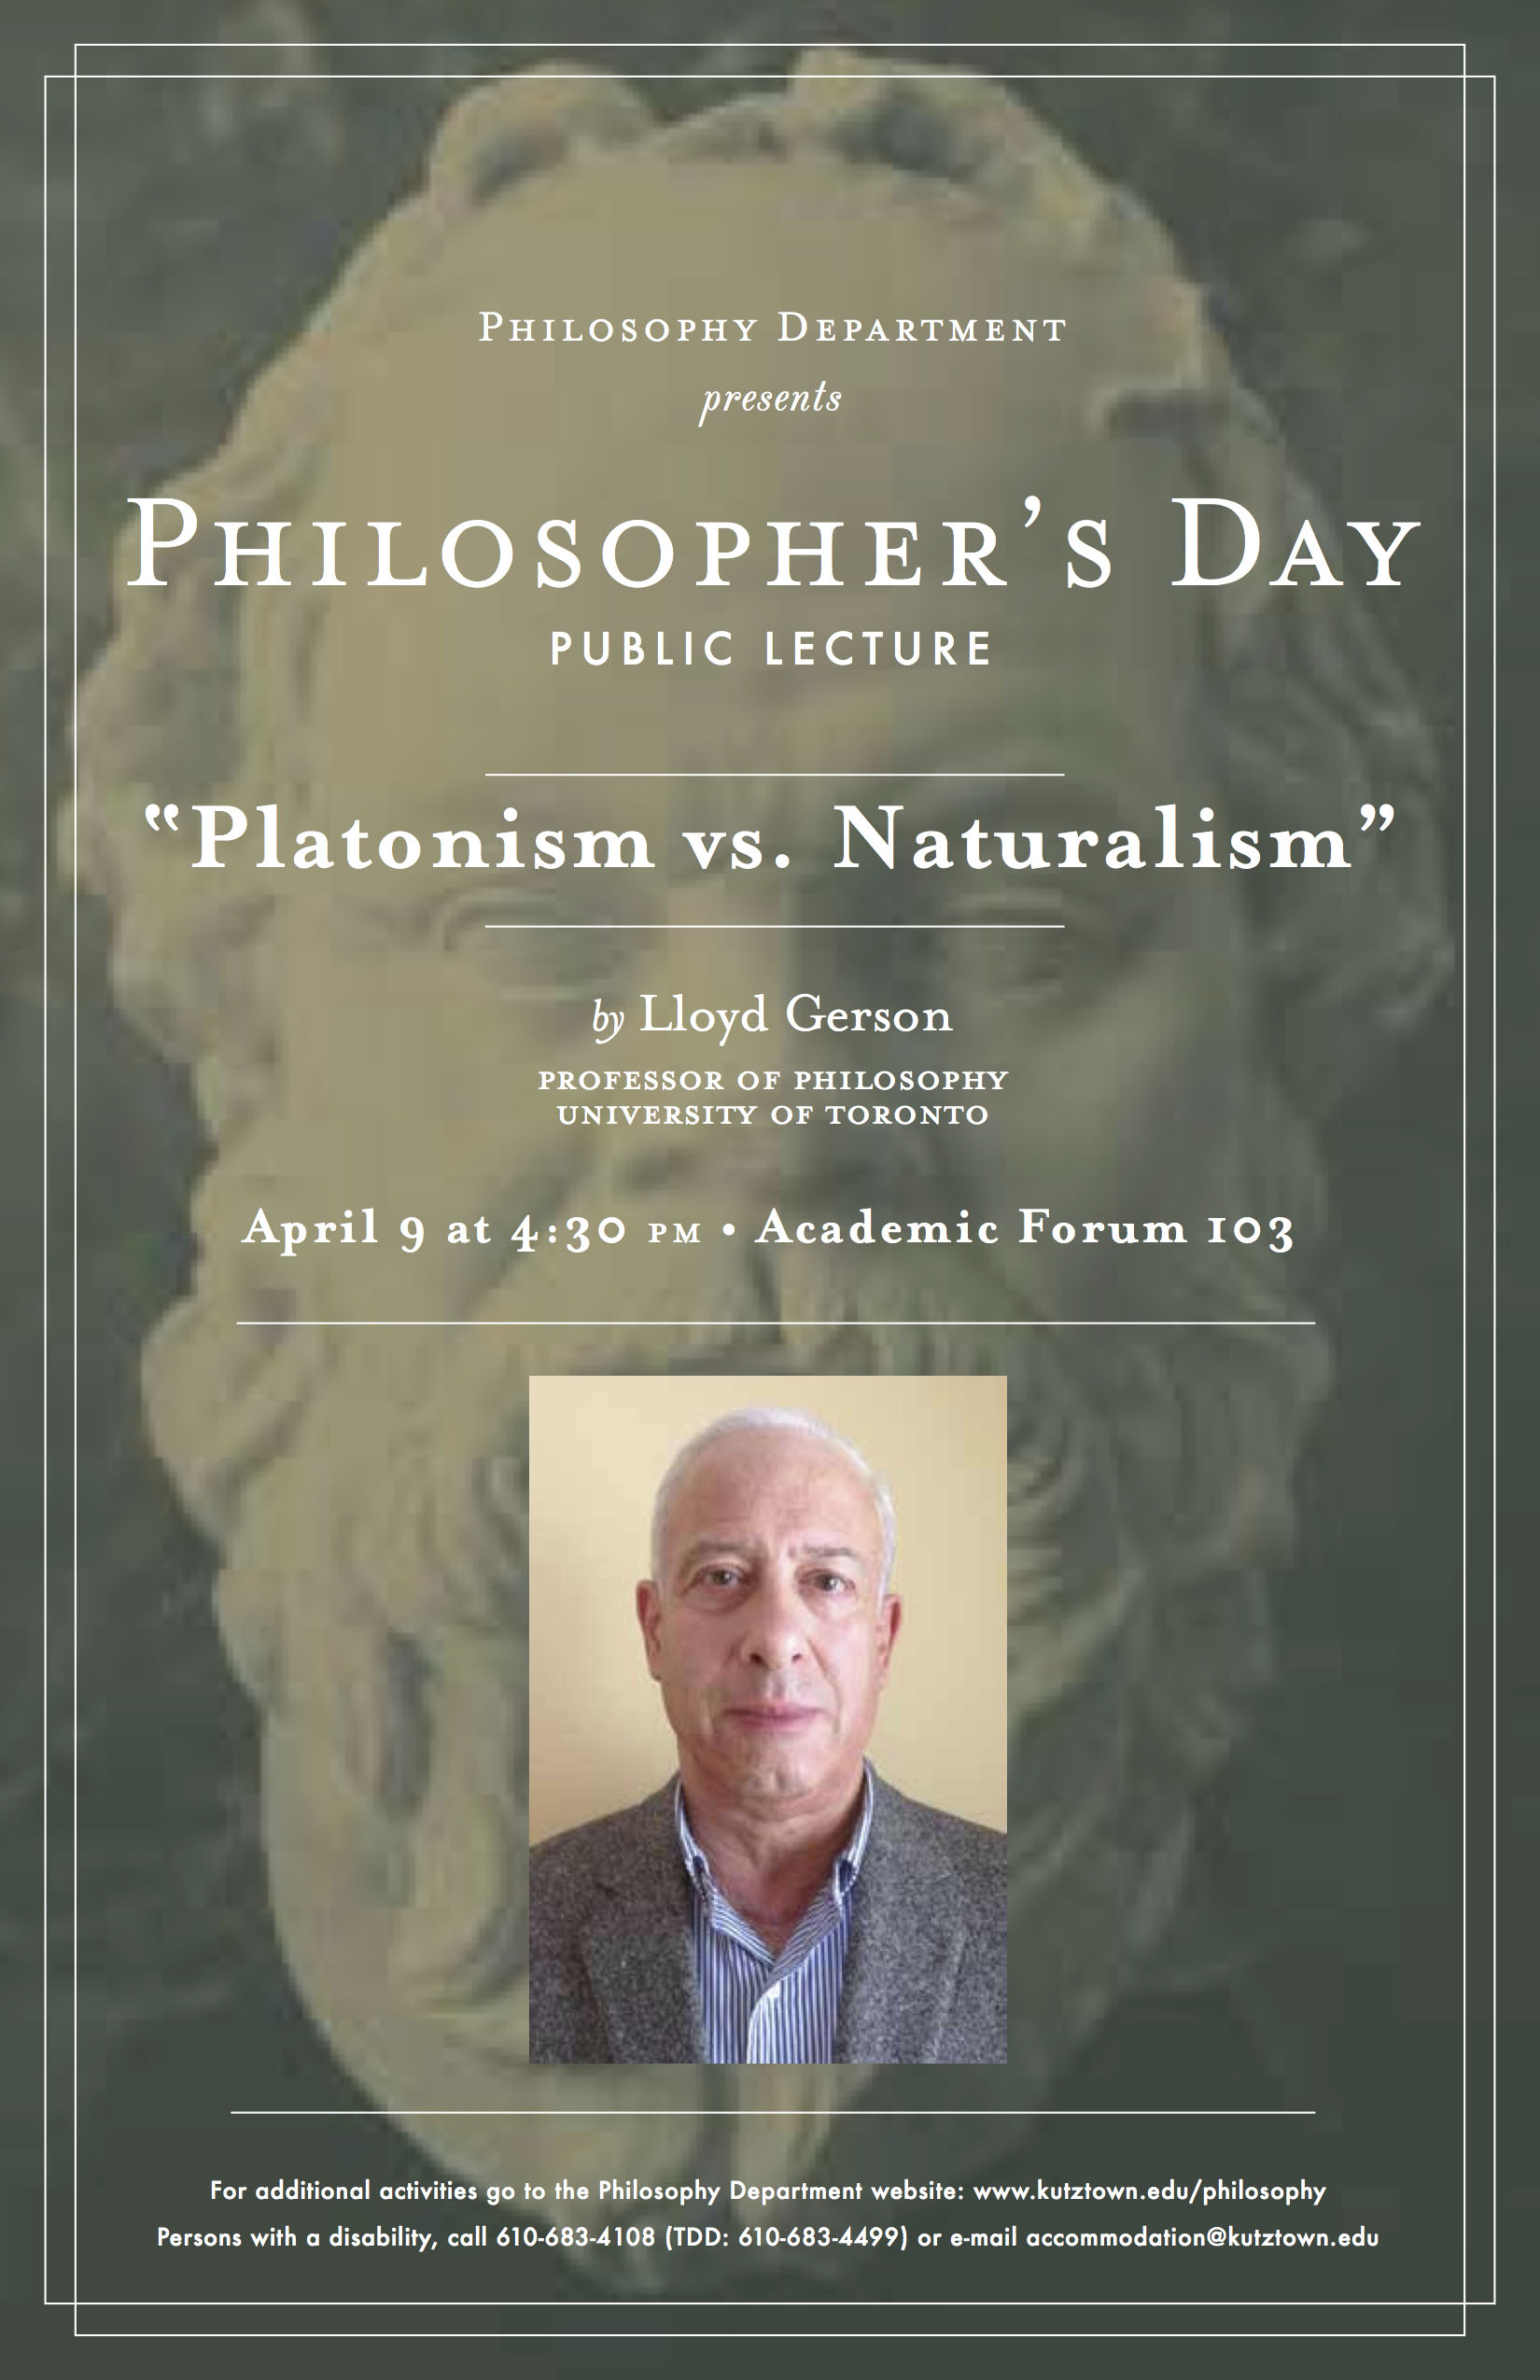 A Poster of Philosopher’s Day 2014. Public lecture: “Platonism vs. Naturalism” by Dr. Lloyd Gerson